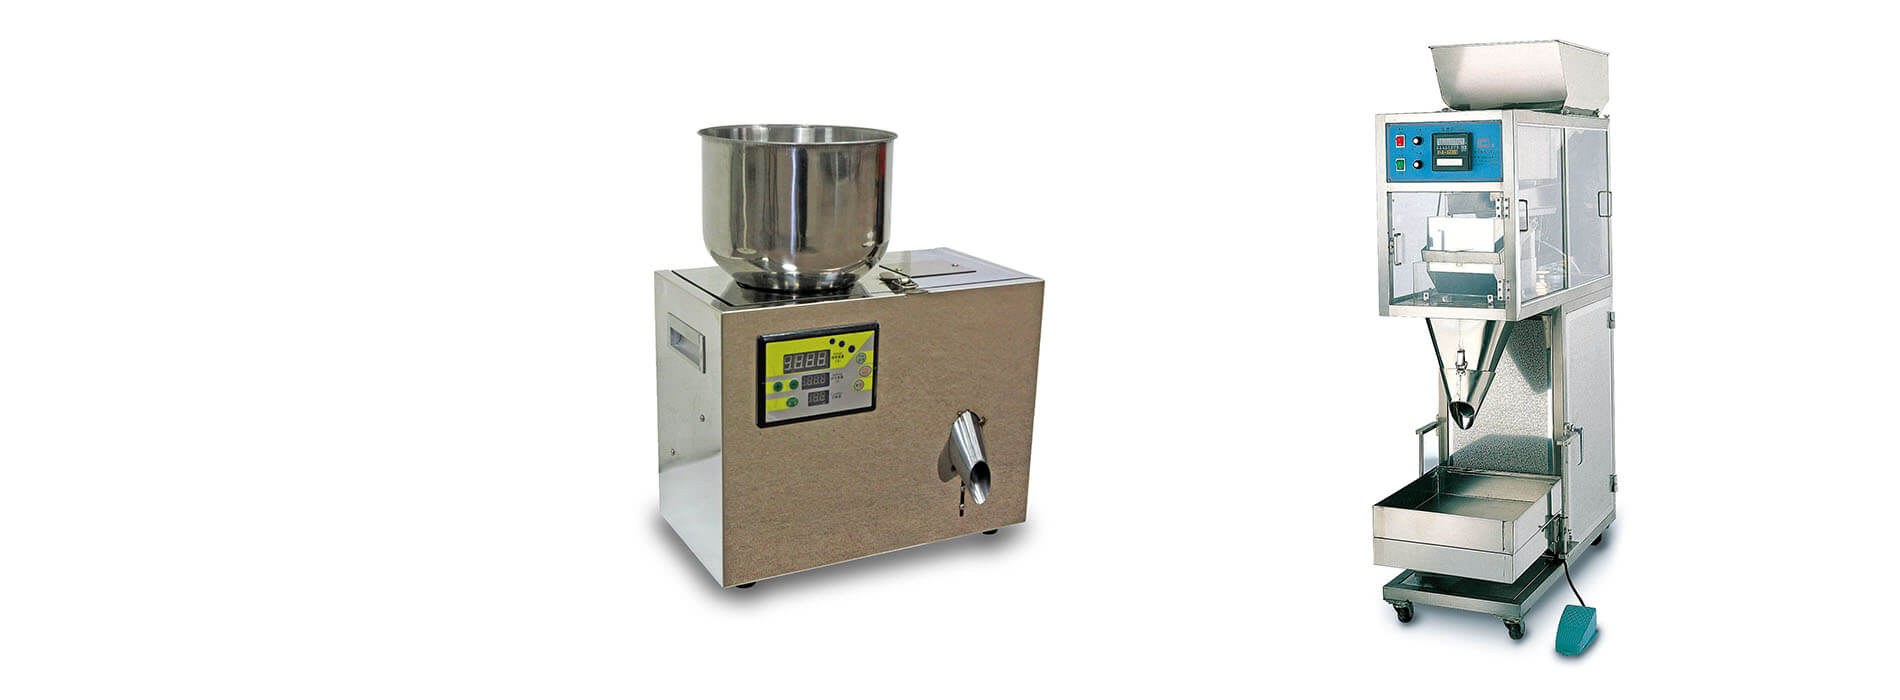 Compact Powder/Particle Automatic Measuring Machine